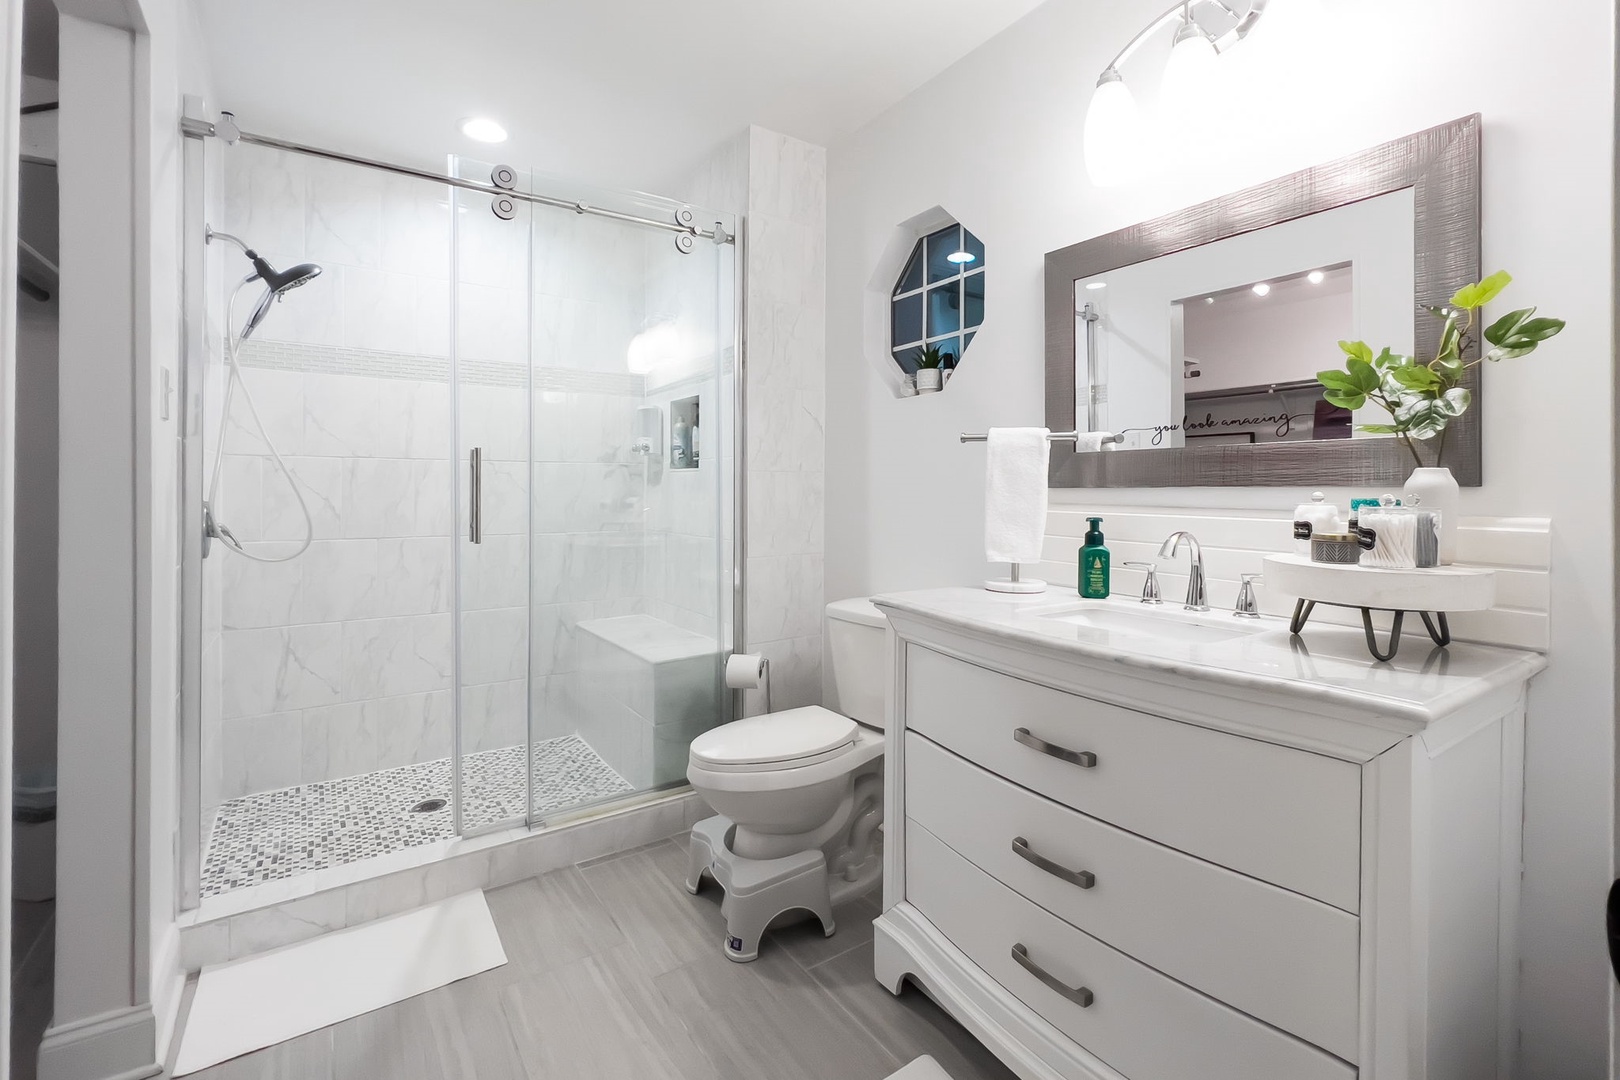 This polished ensuite includes a large single vanity & glass shower